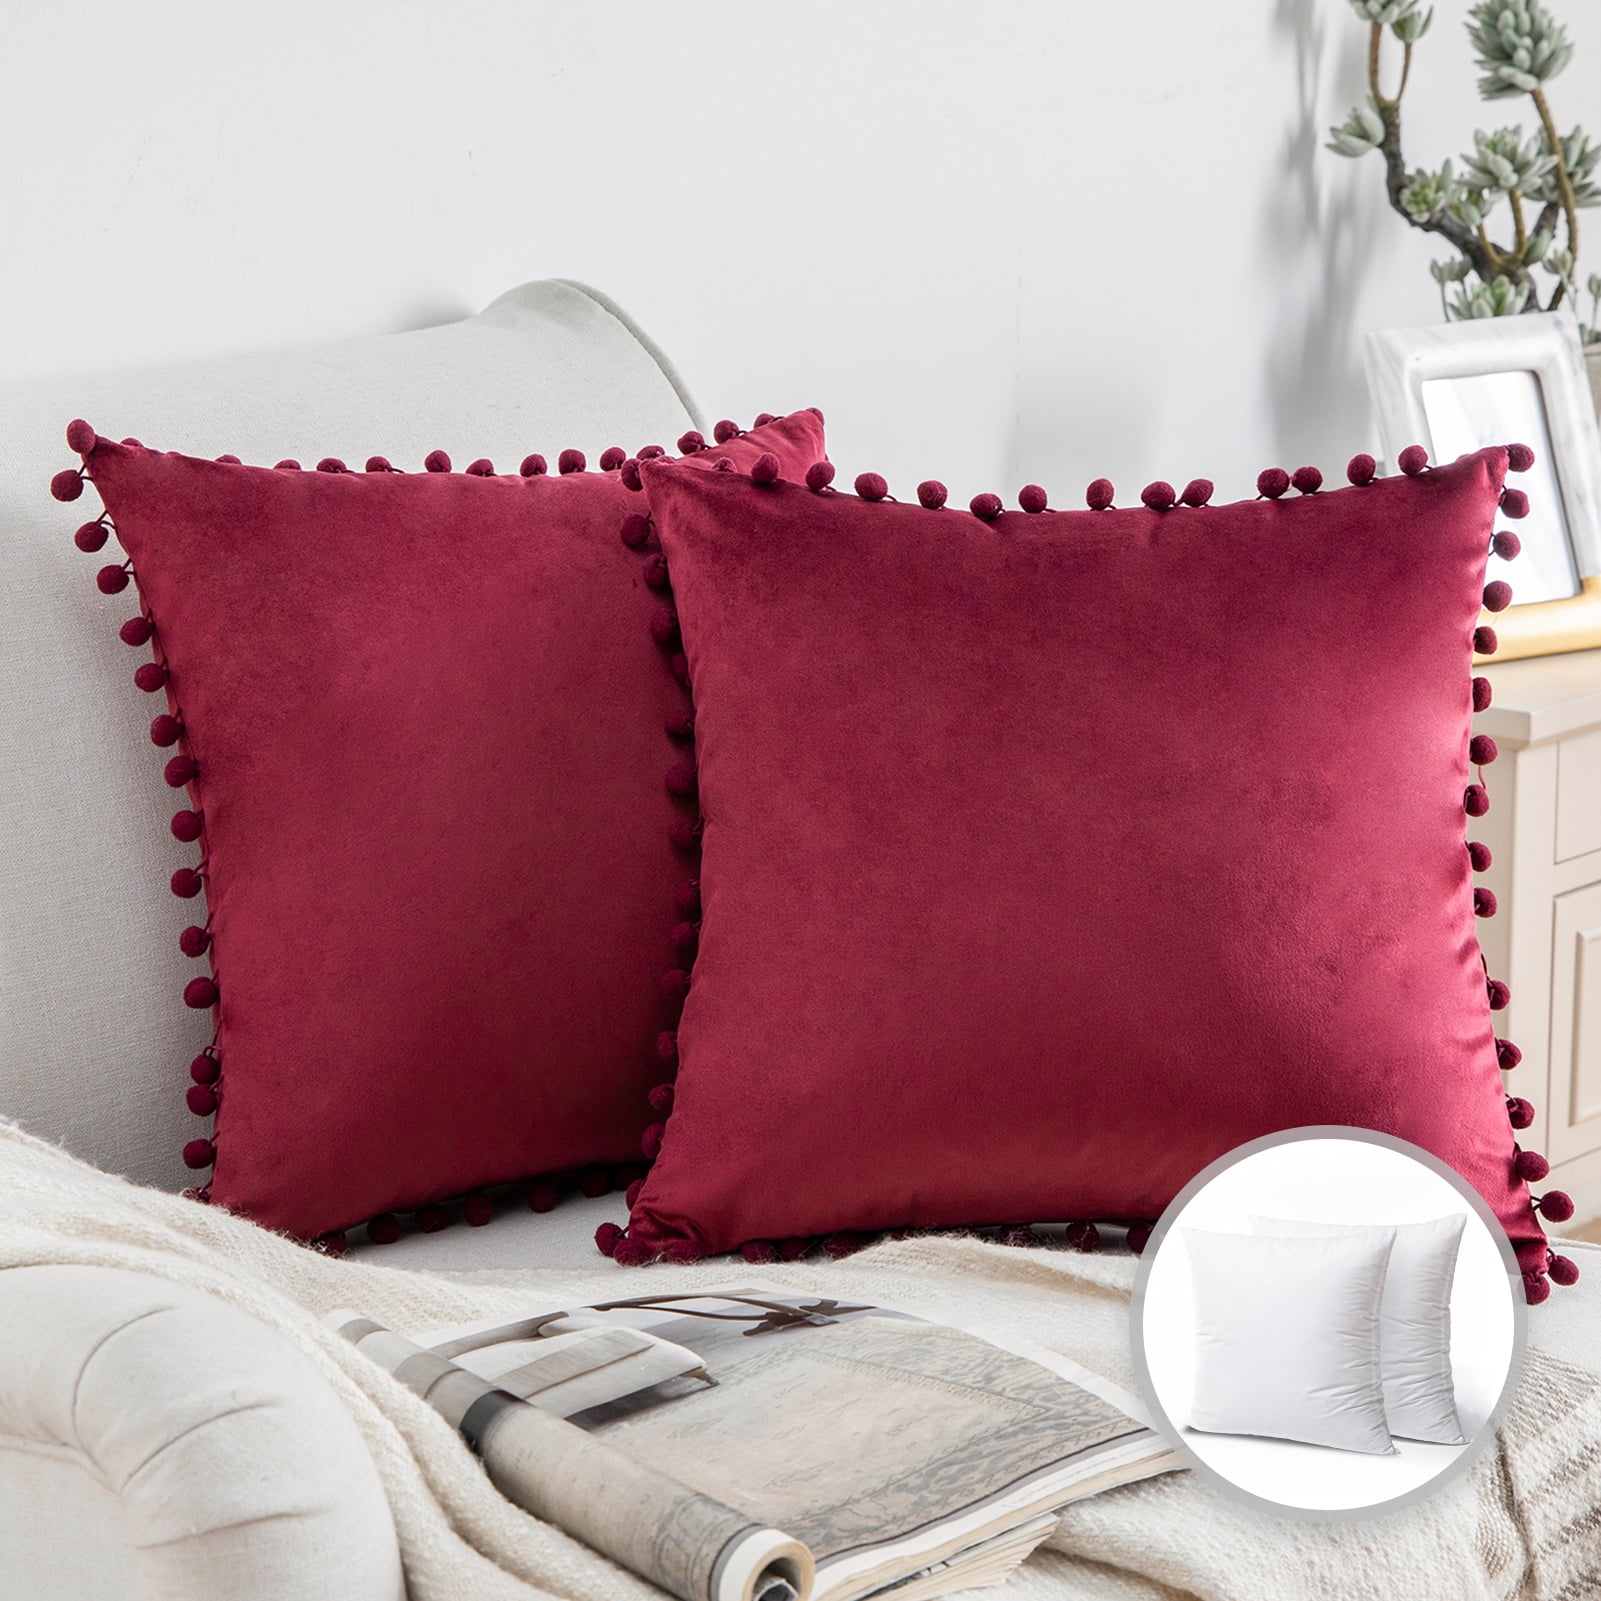 GIGIZAZA 18inch Decor Couch Throw Pillows,Red Decorative Round Pillow  Cushions,Velvet Pillows Inserts 2 Sets